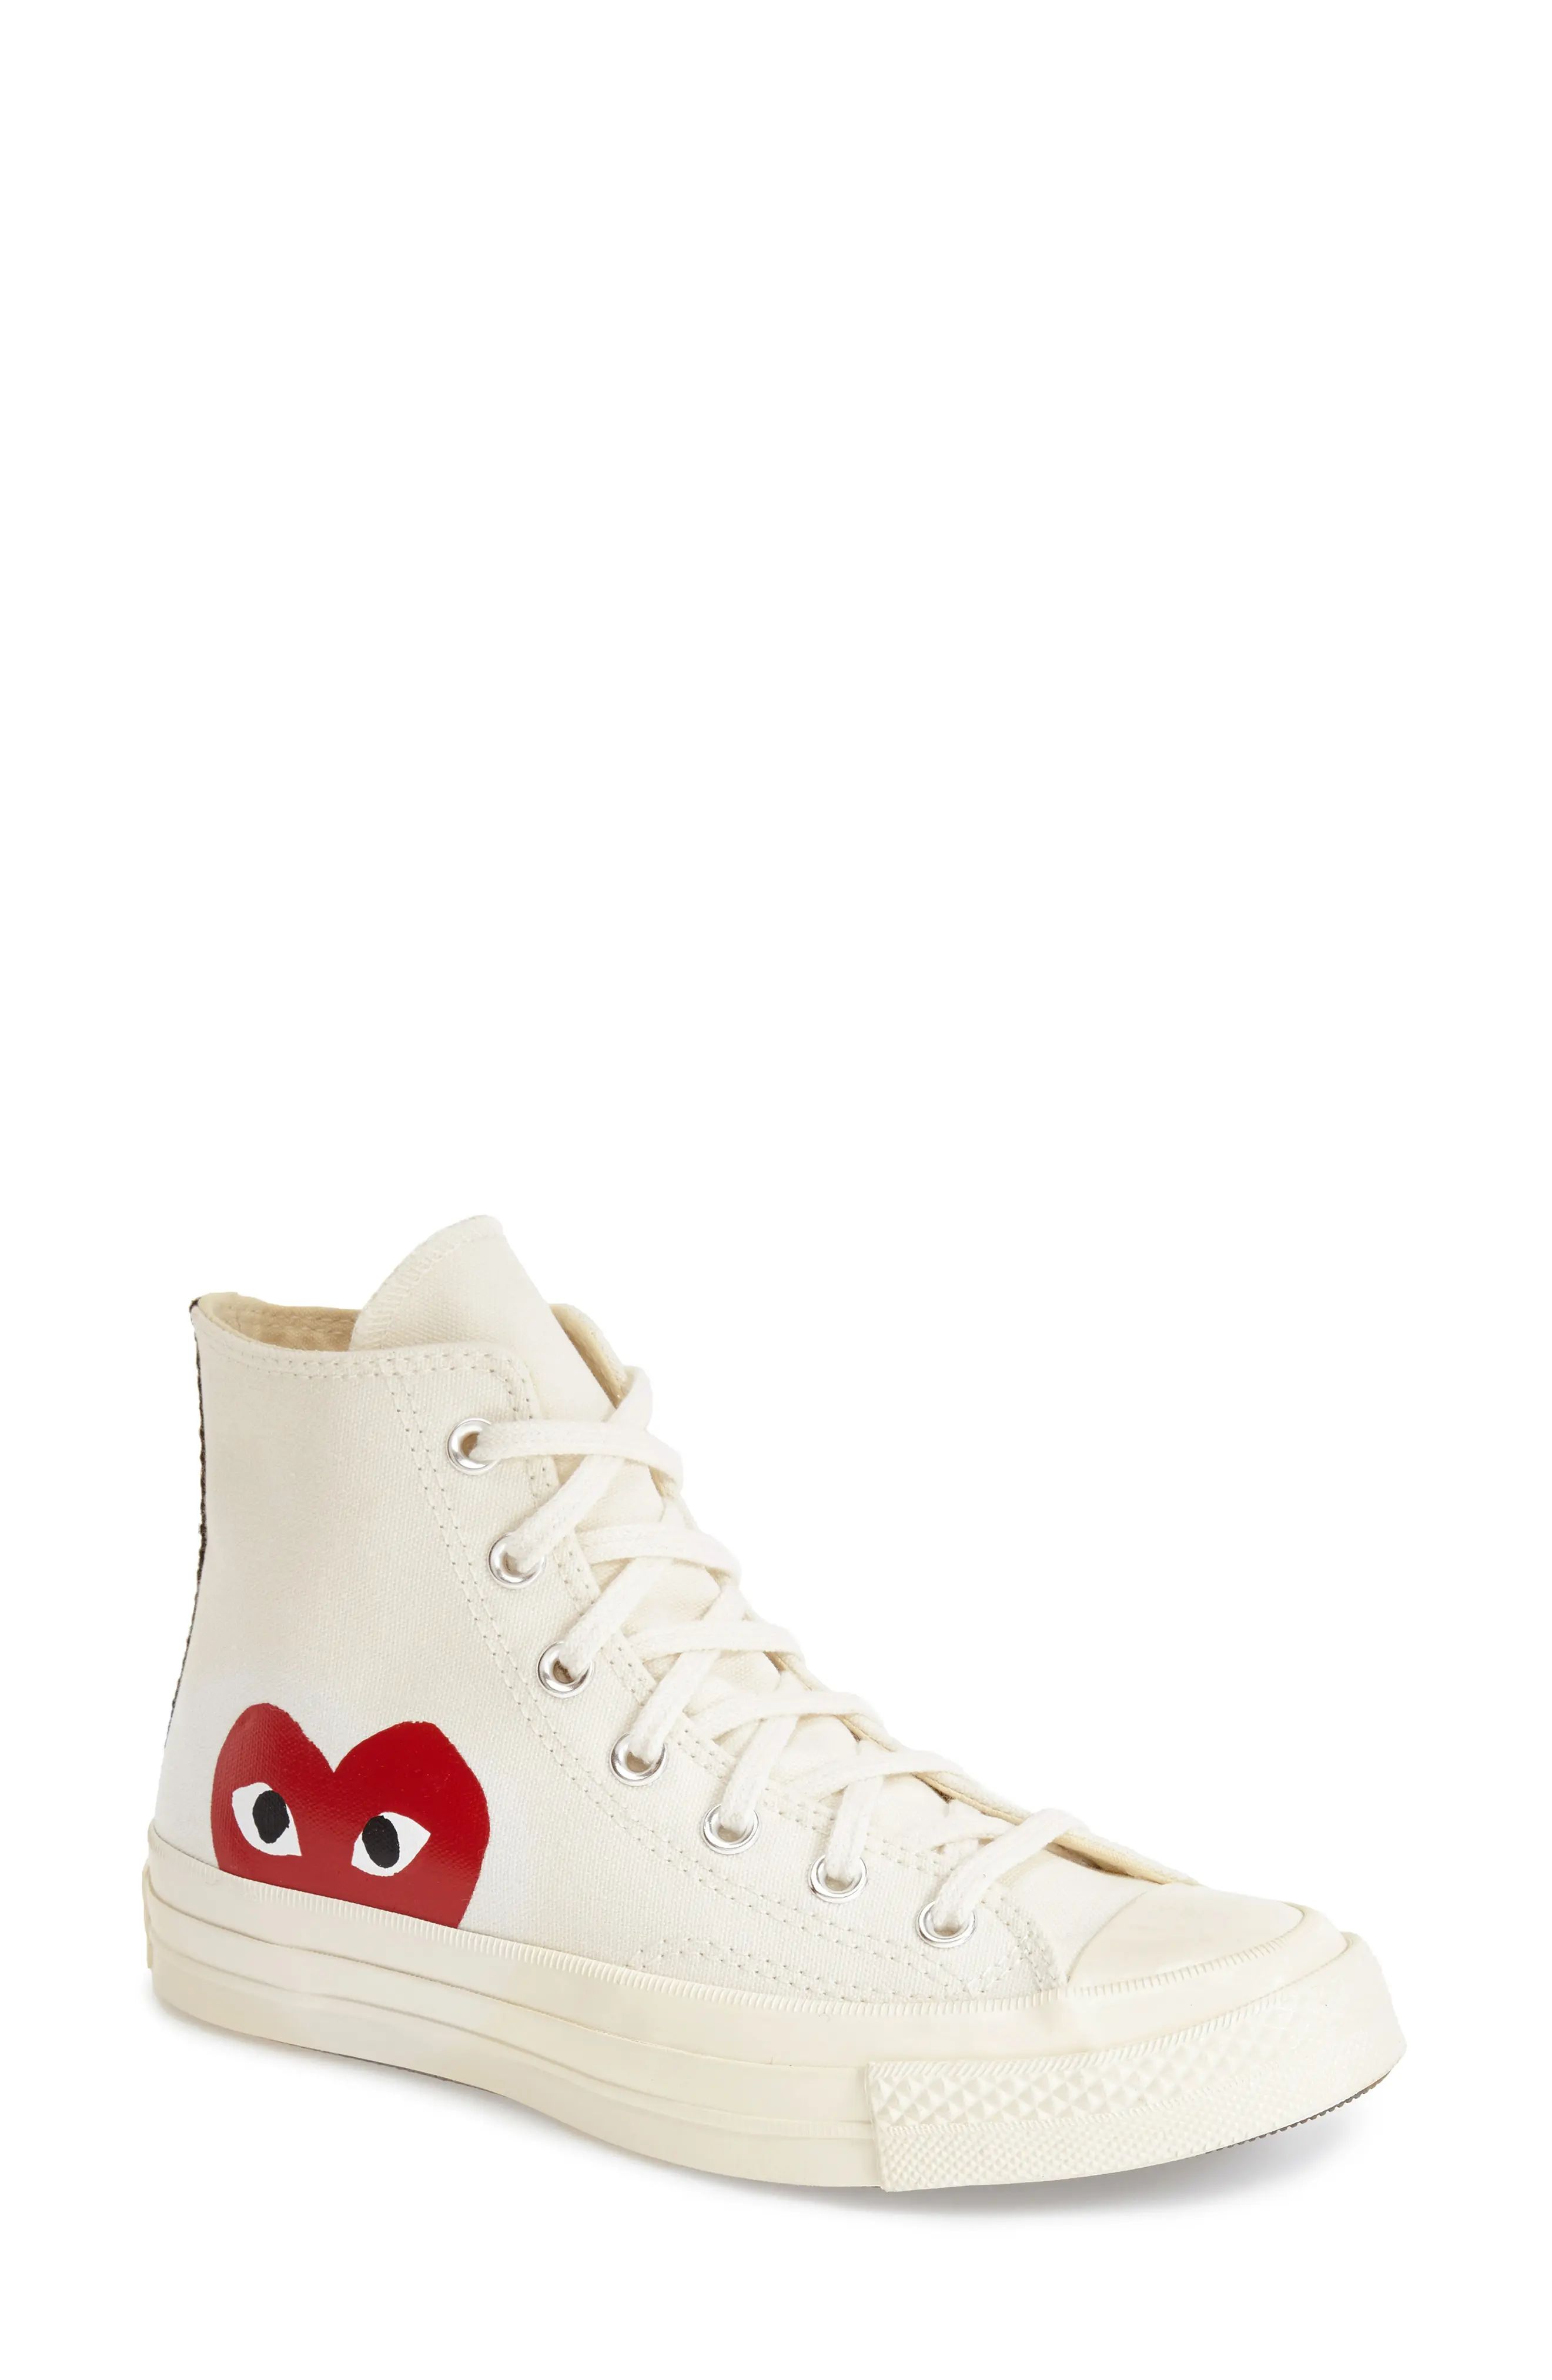 Comme des Garcons PLAY x Converse Chuck Taylor(R) - Hidden Heart High Top Sneaker in White Canvas at | Nordstrom